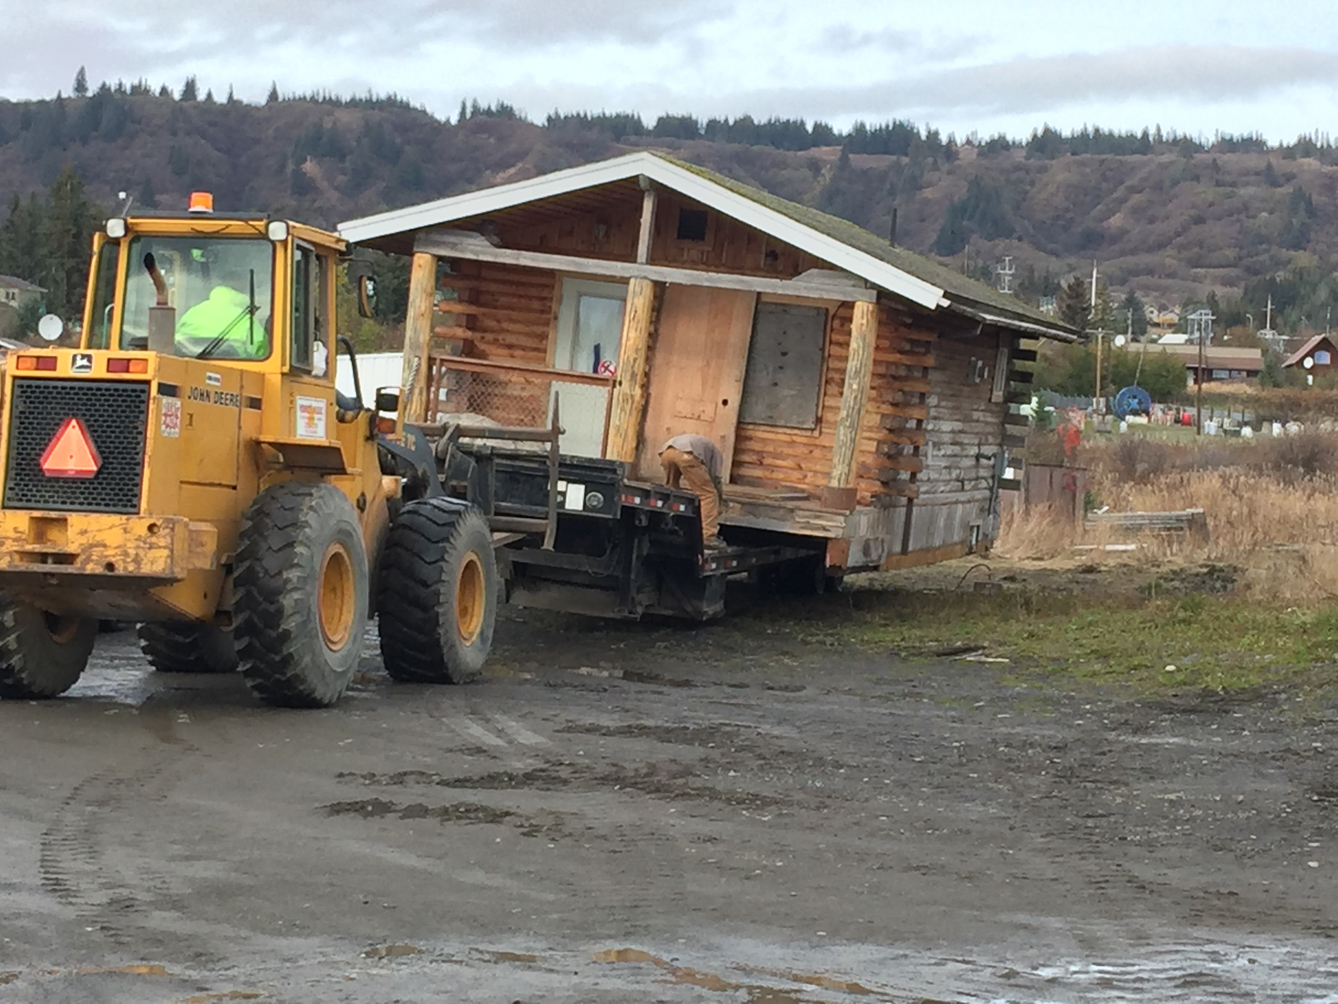 Contractors move cabins for Waddell Way project